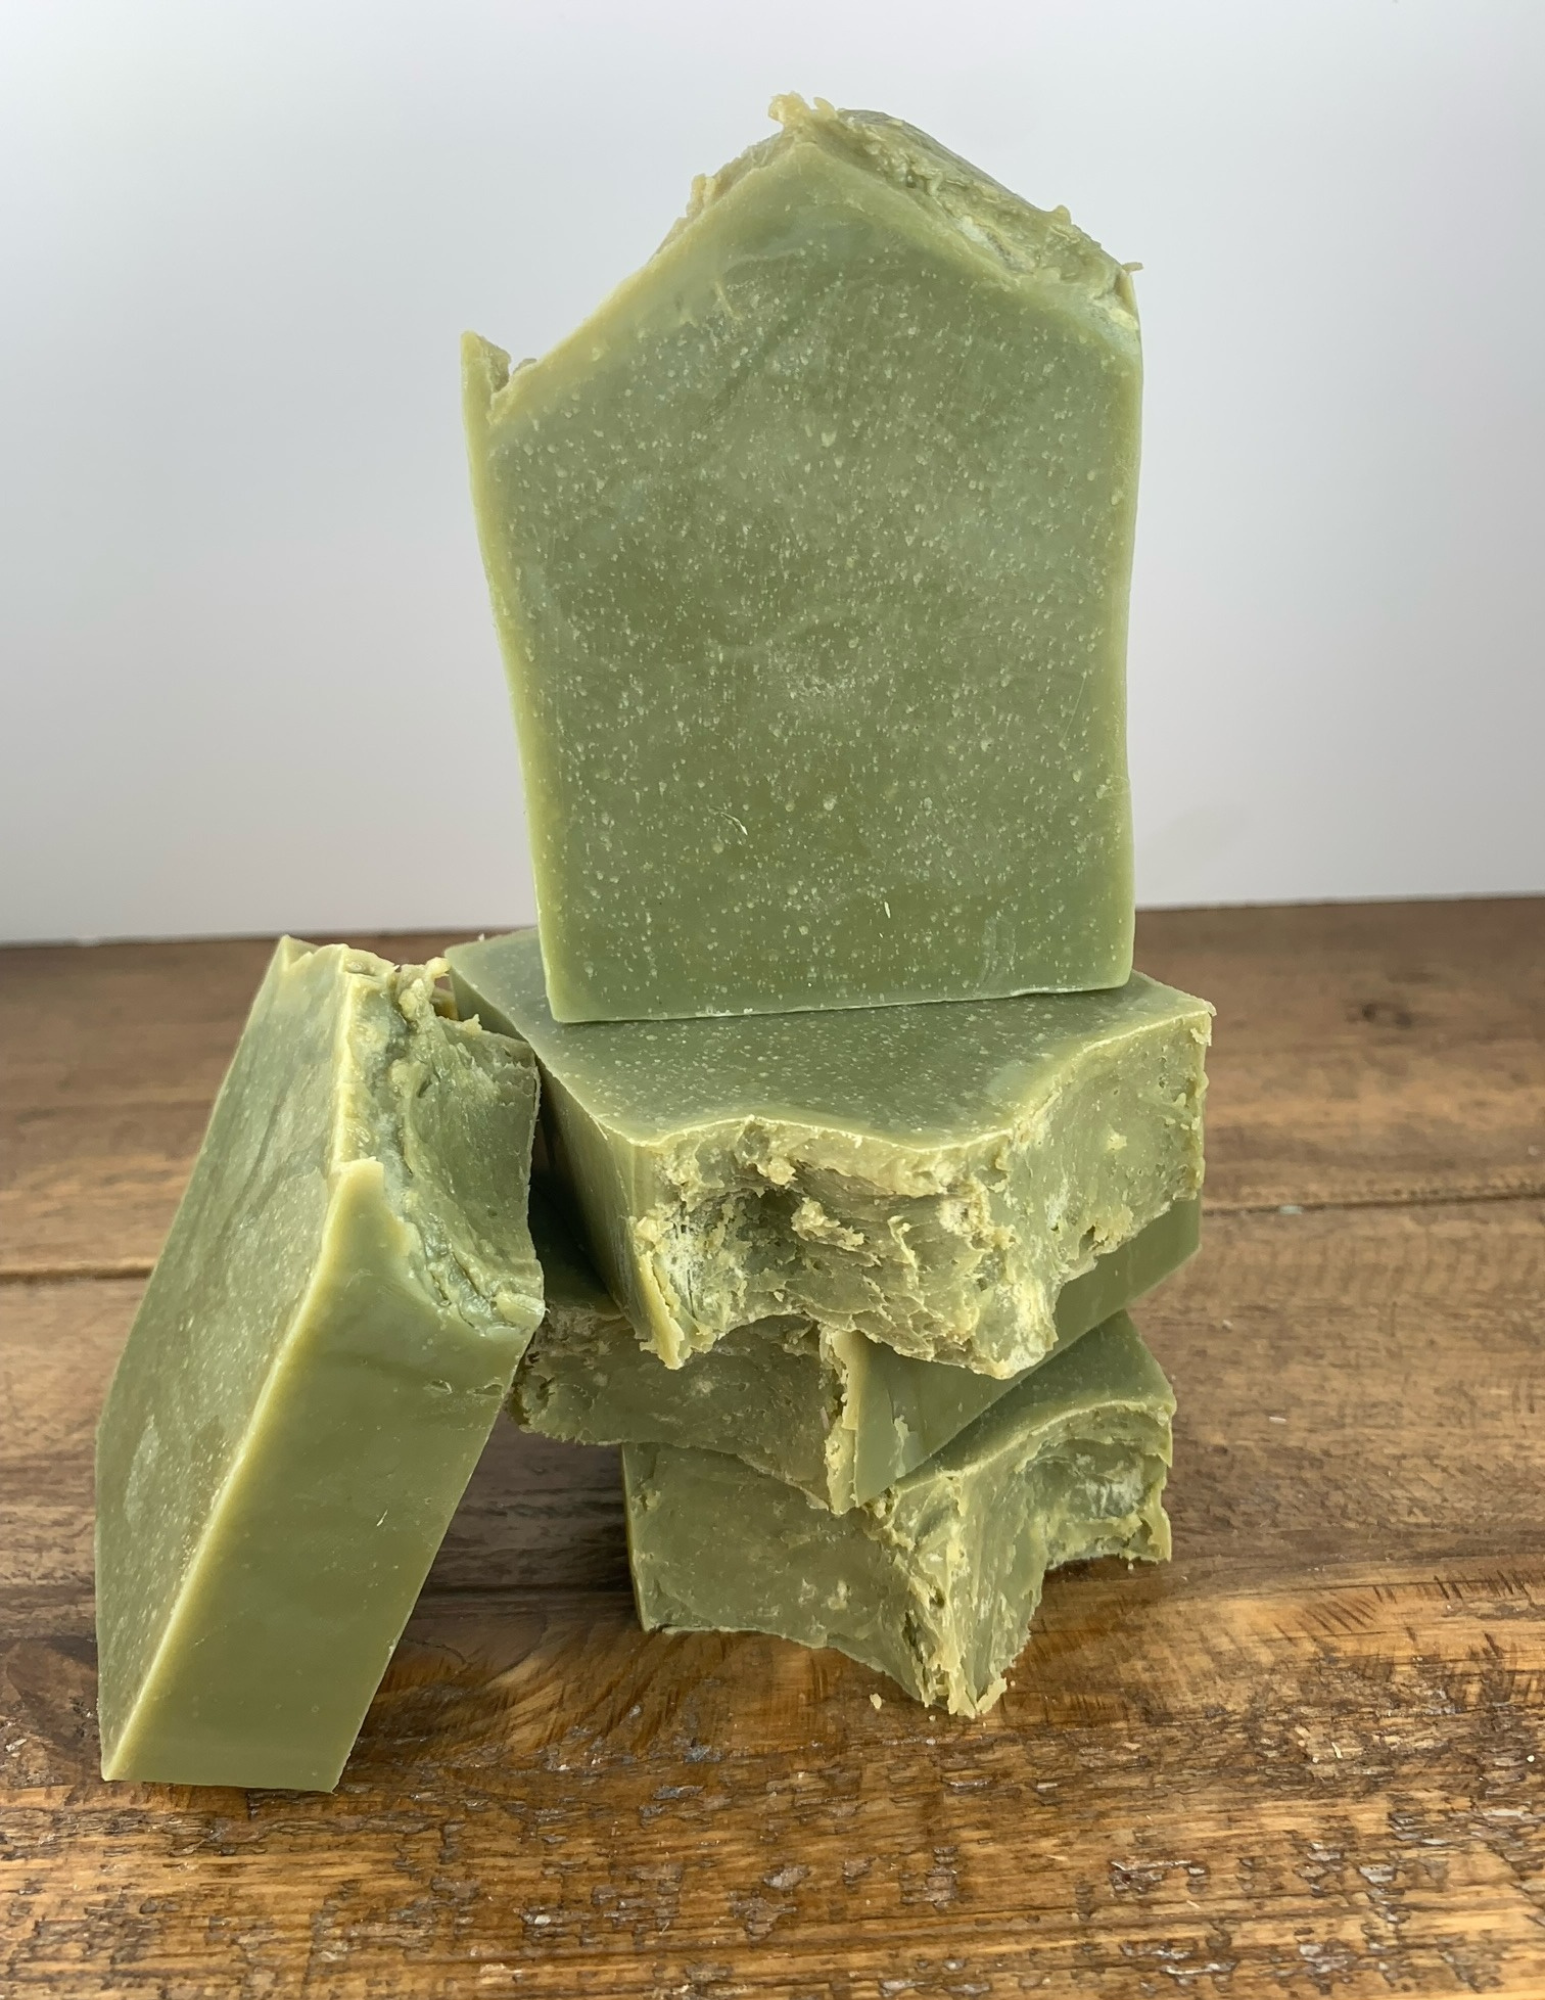 Four bars of this refreshing spearmint scented soap sit atop a wooden table. This soap is a dark green from the spurlina powder and features essential oils.